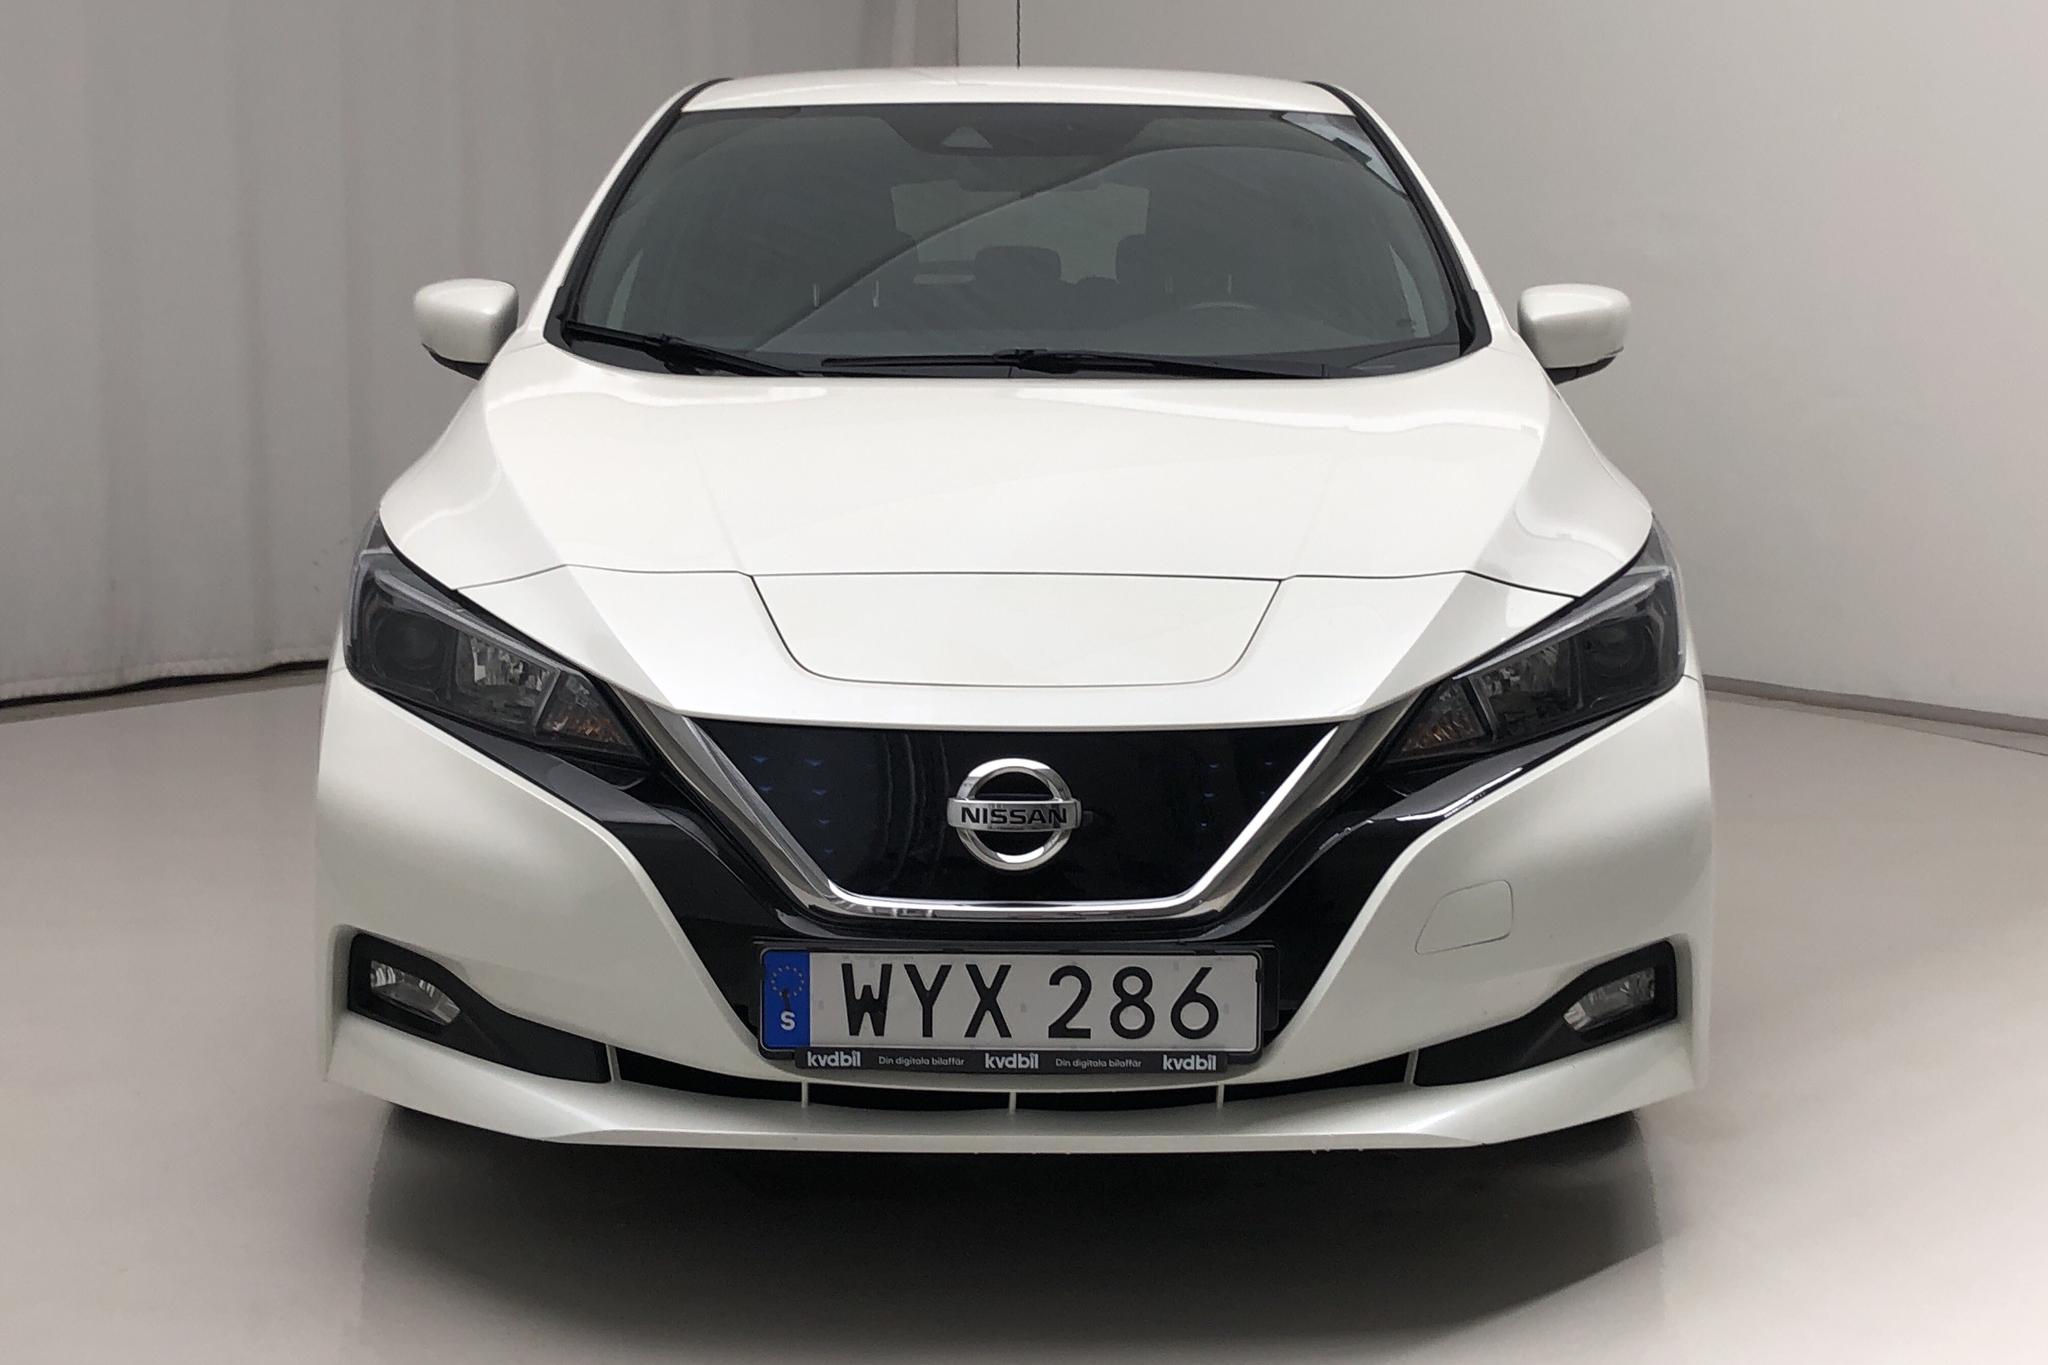 Nissan LEAF 5dr 39 kWh (150hk) - 29 520 km - Automatic - white - 2018